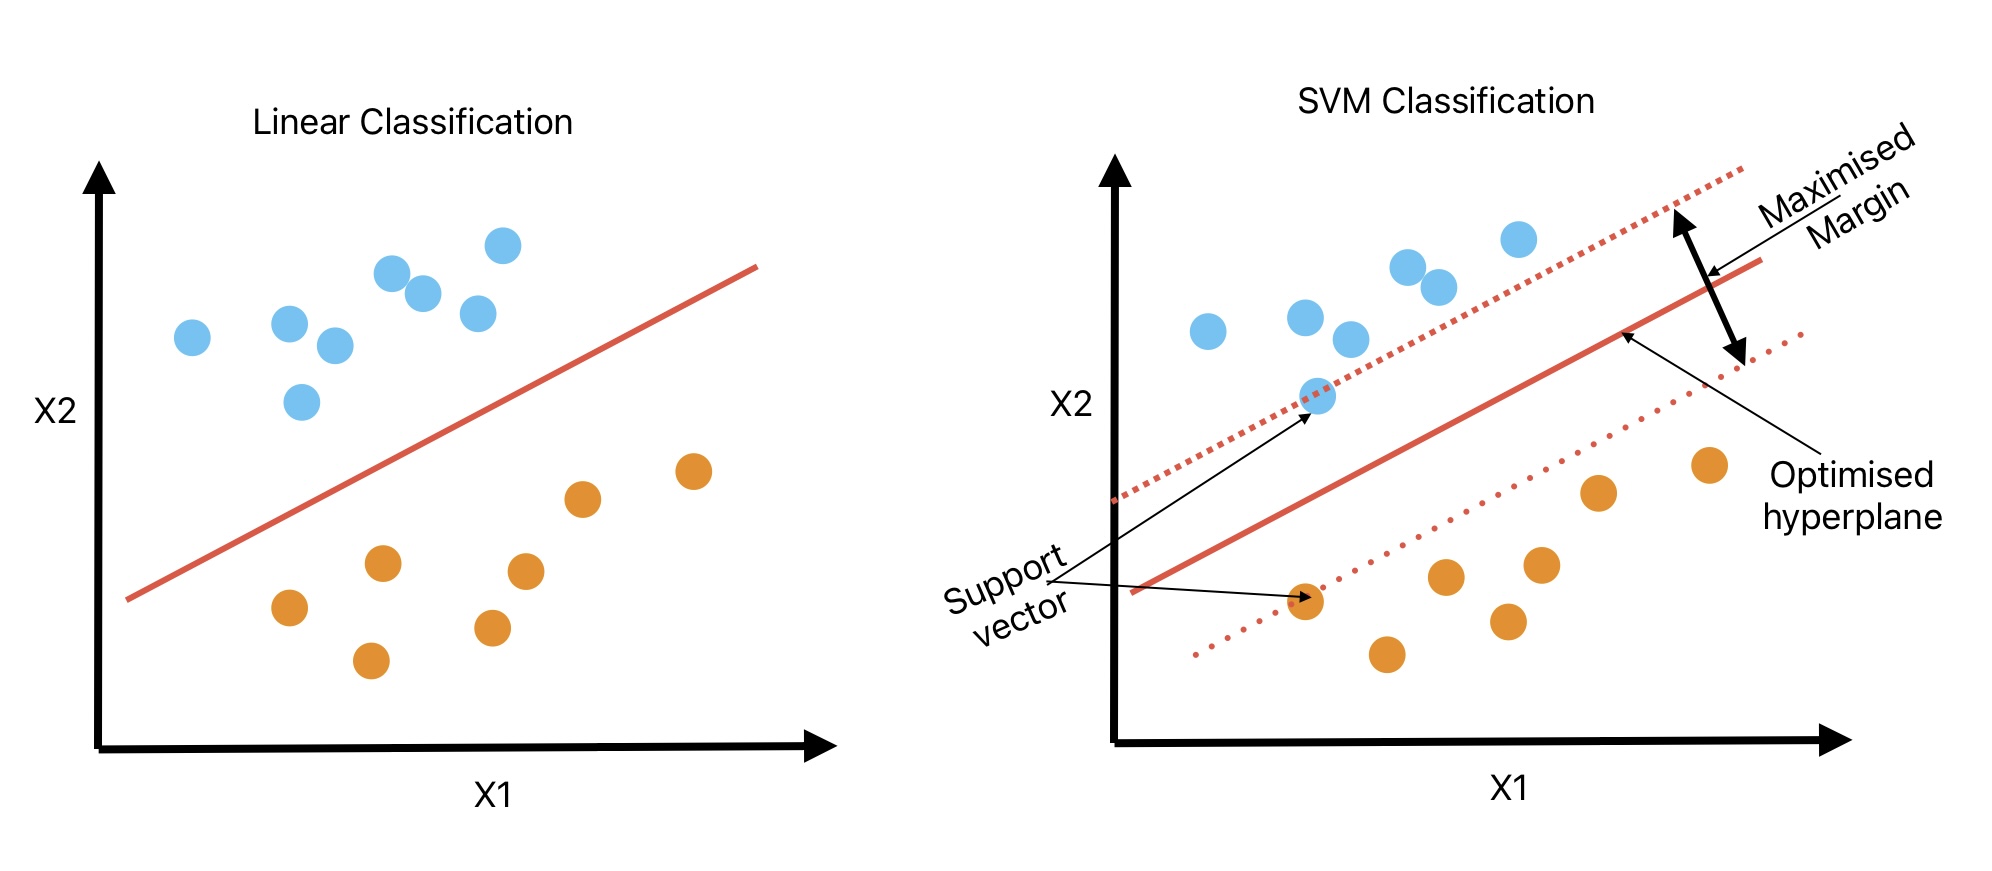 This image shows the difference between linear and SVM classification